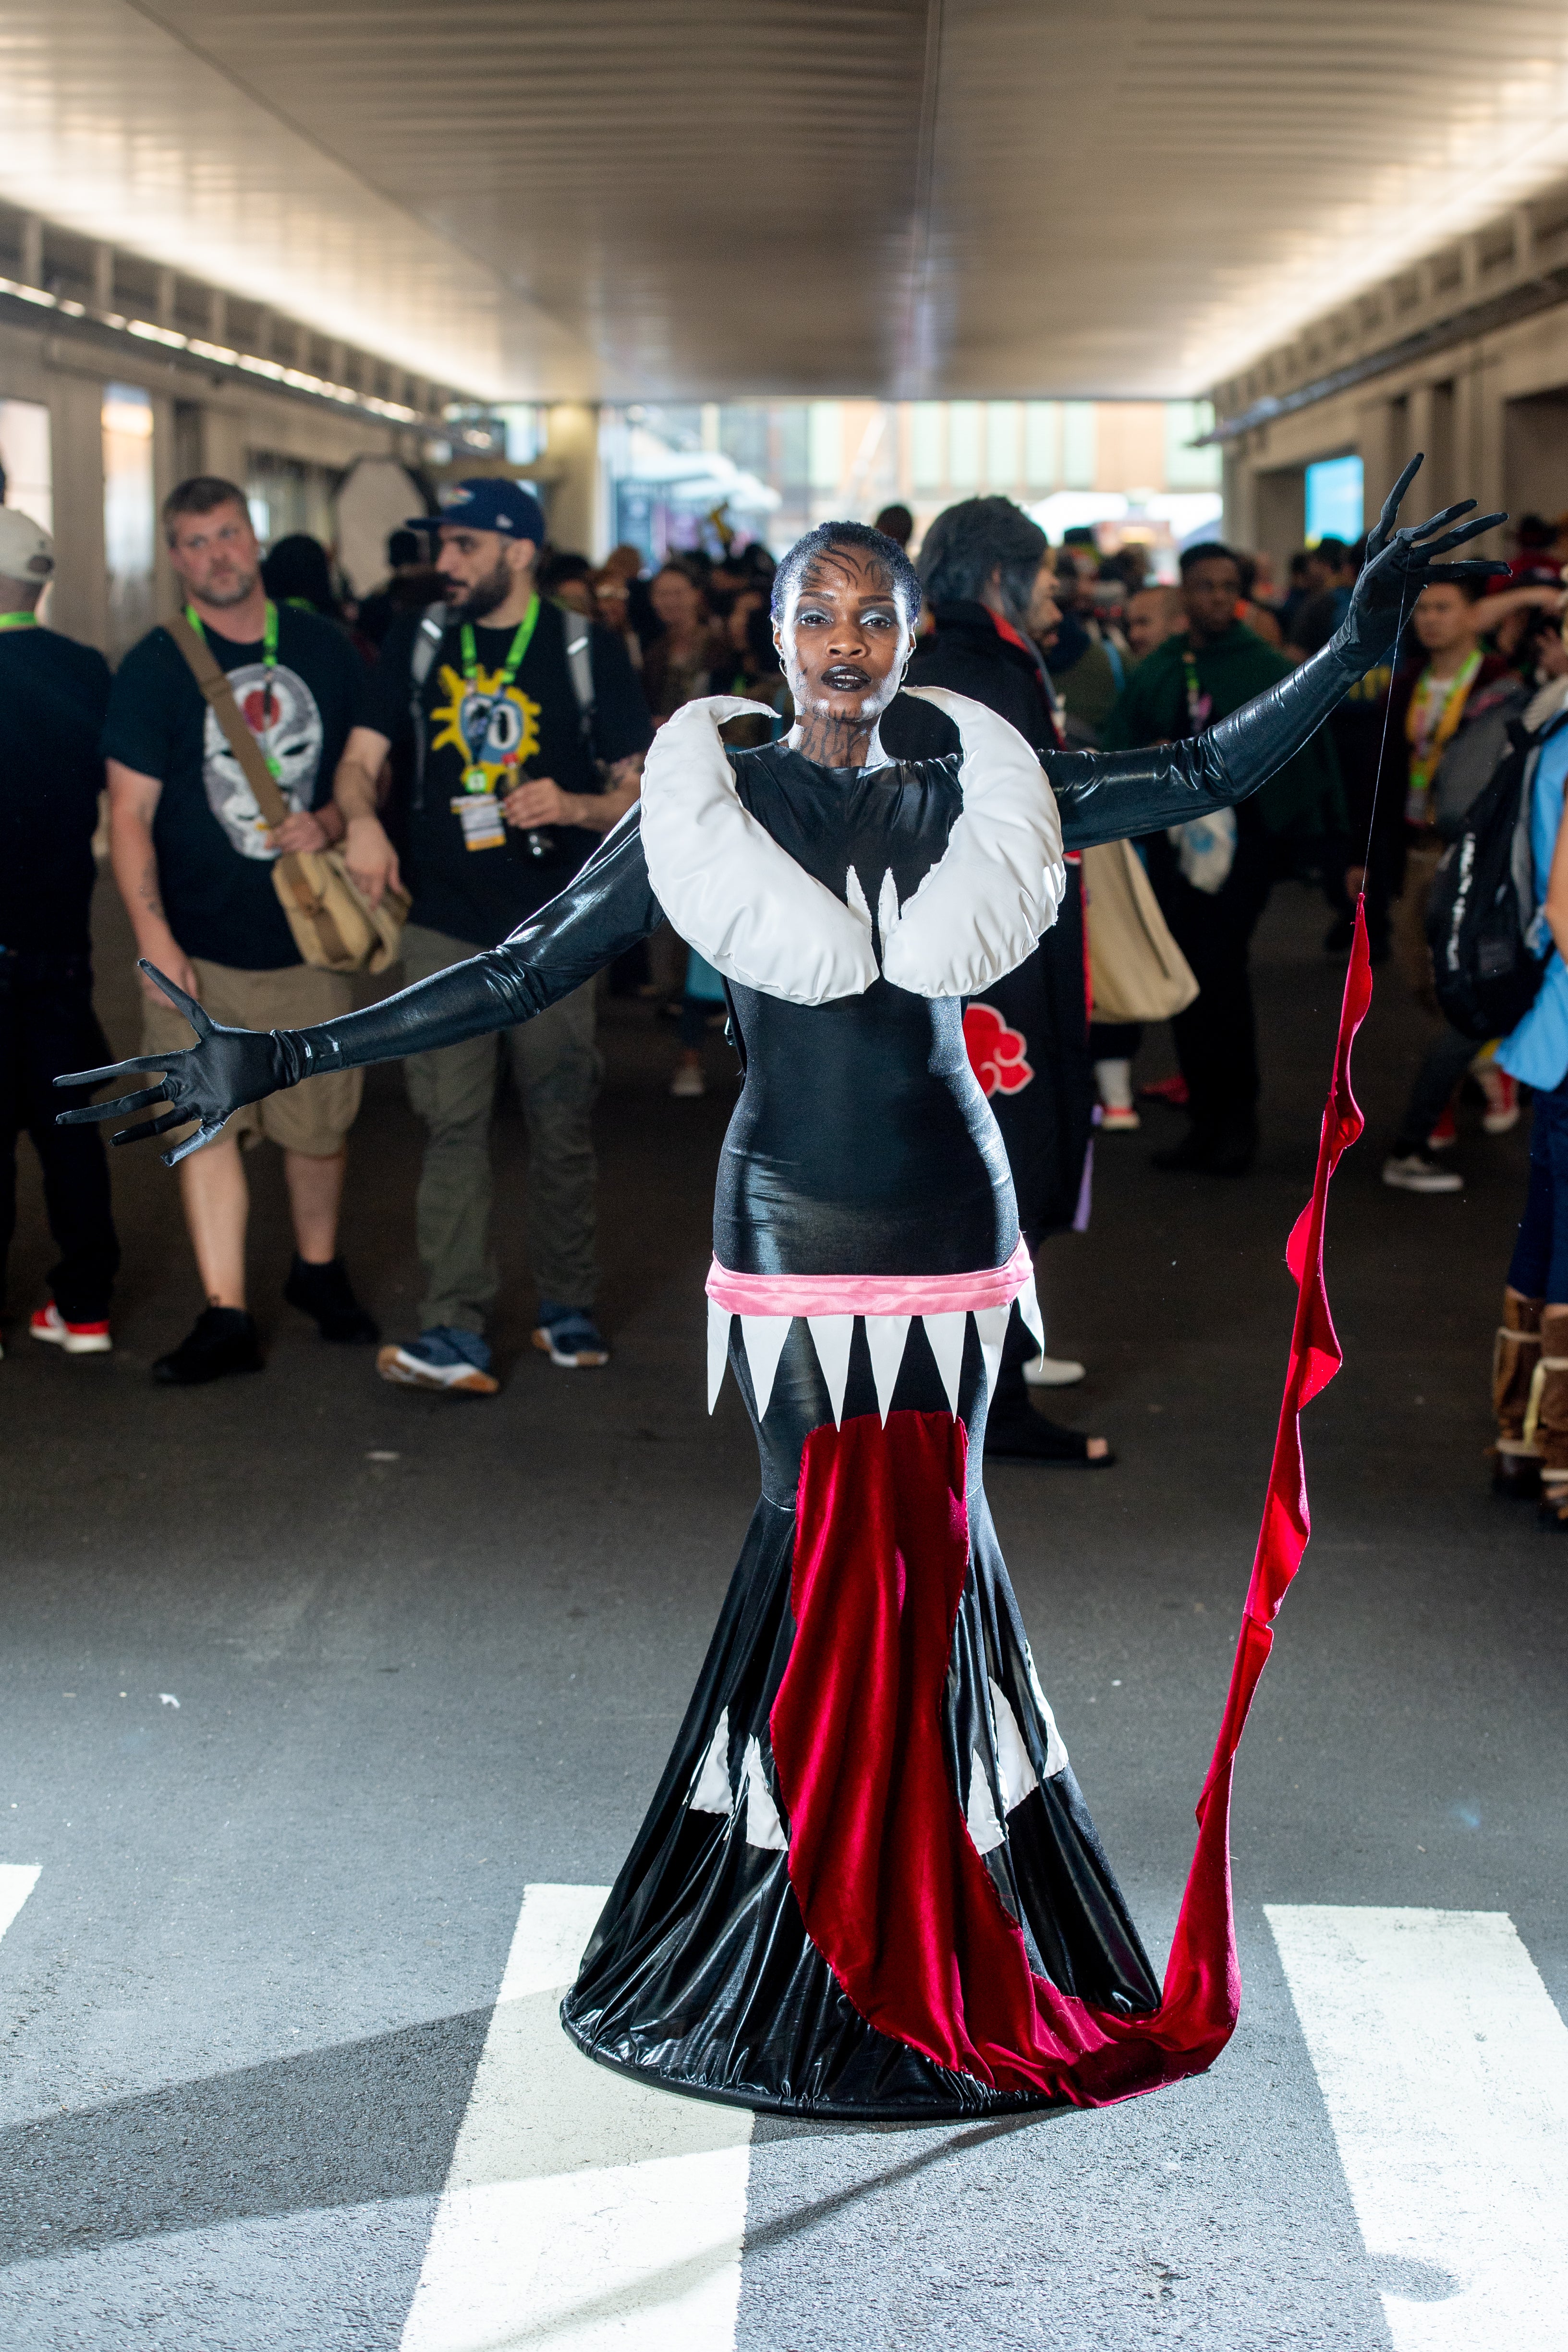 New York Comic Con: 17 Black Cosplayers Who Stole The Show This Year